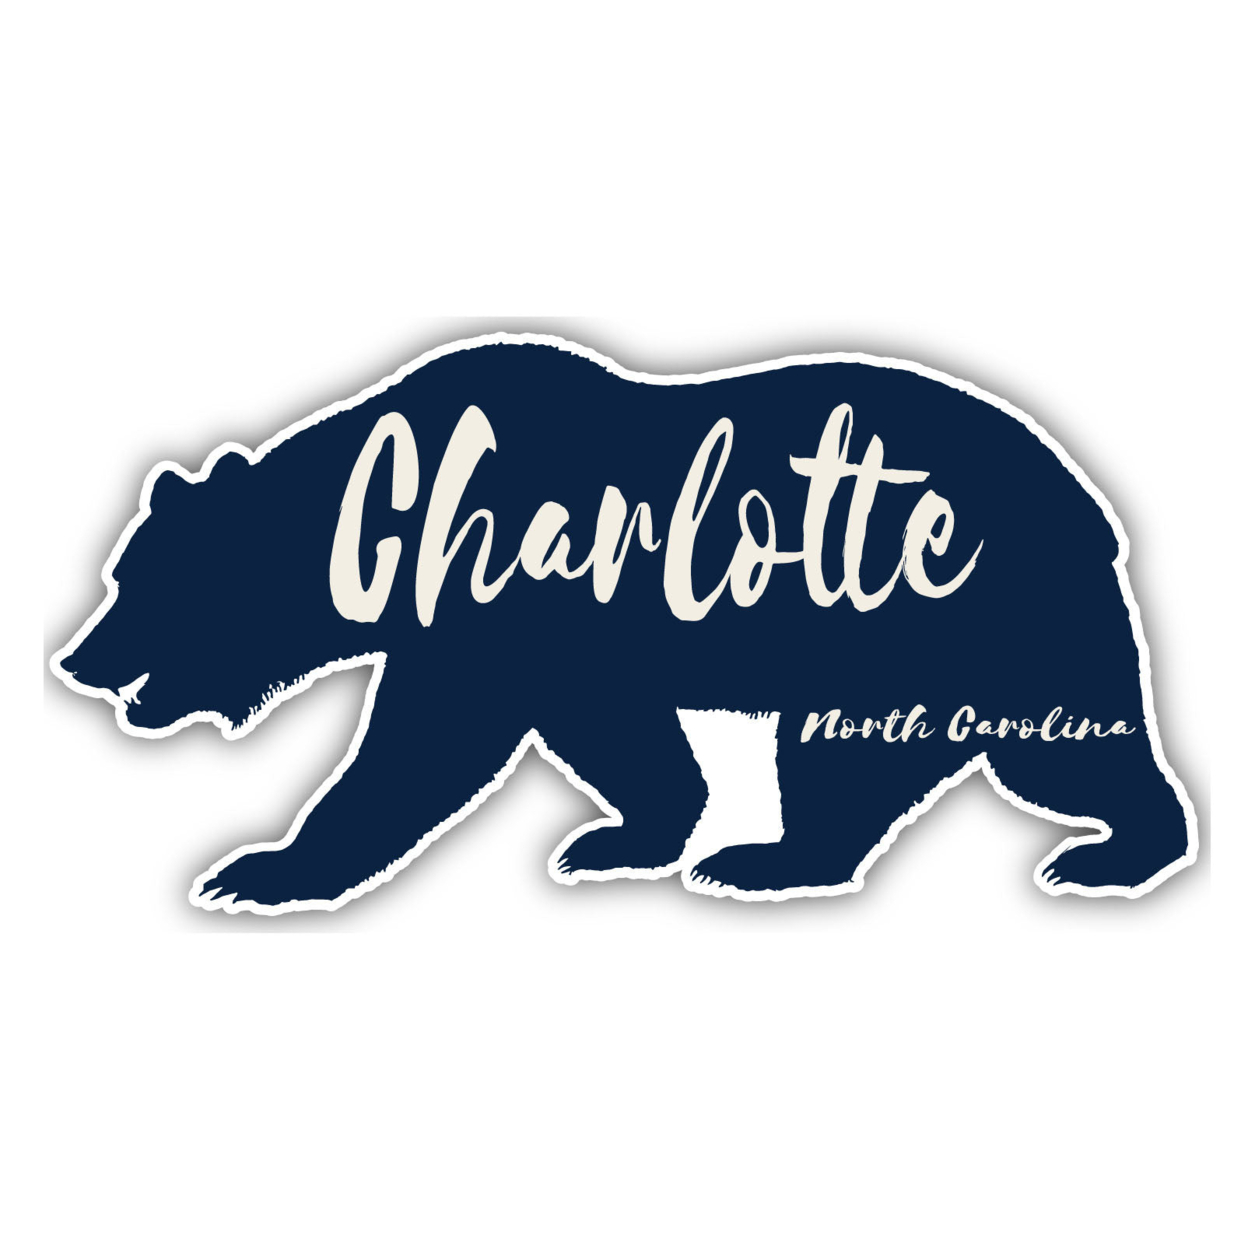 Charlotte North Carolina Souvenir Decorative Stickers (Choose Theme And Size) - 4-Pack, 10-Inch, Great Outdoors